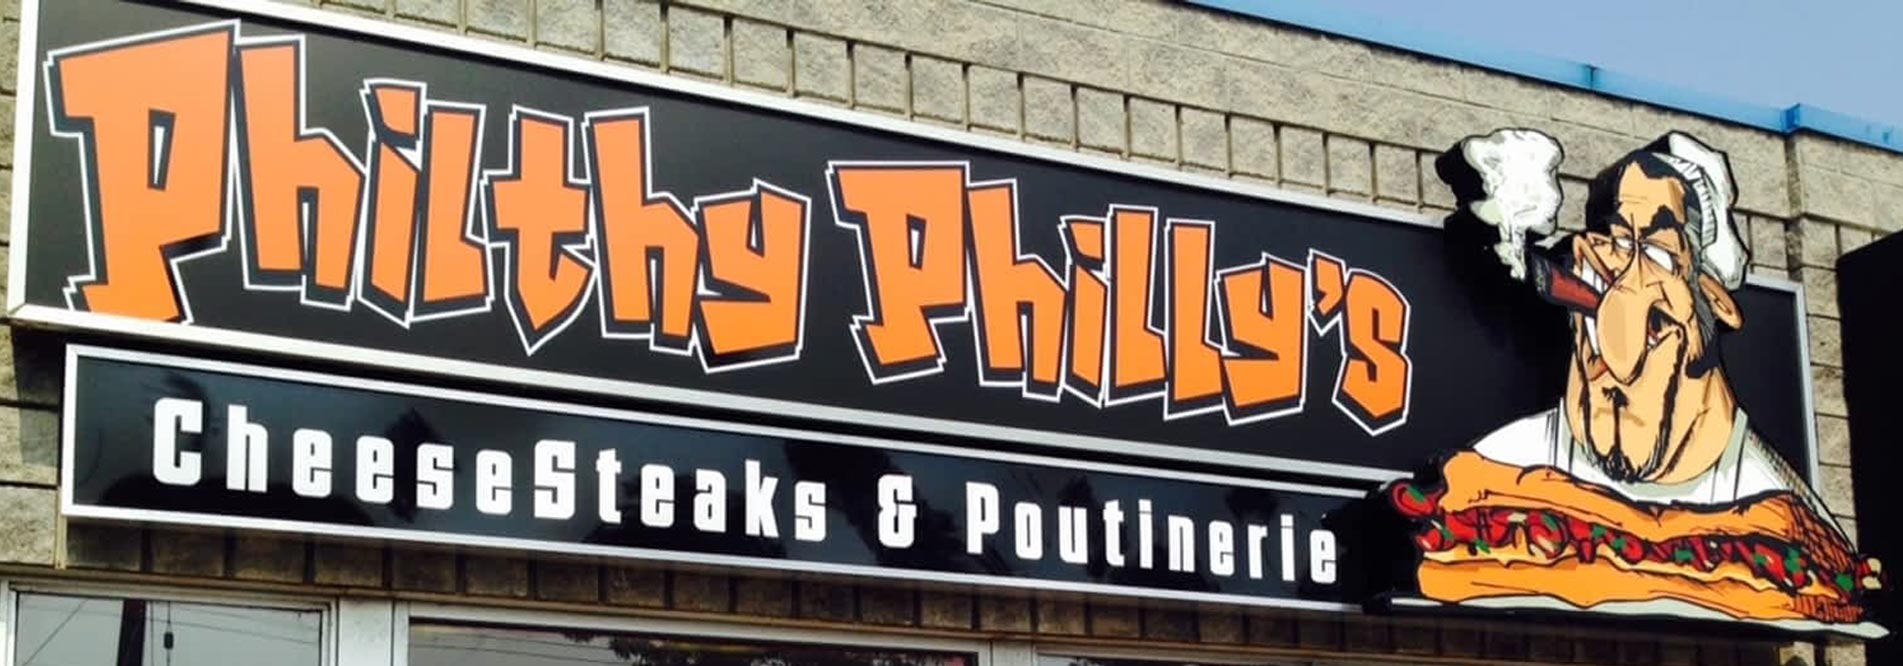 Philthy Phillys Franchising